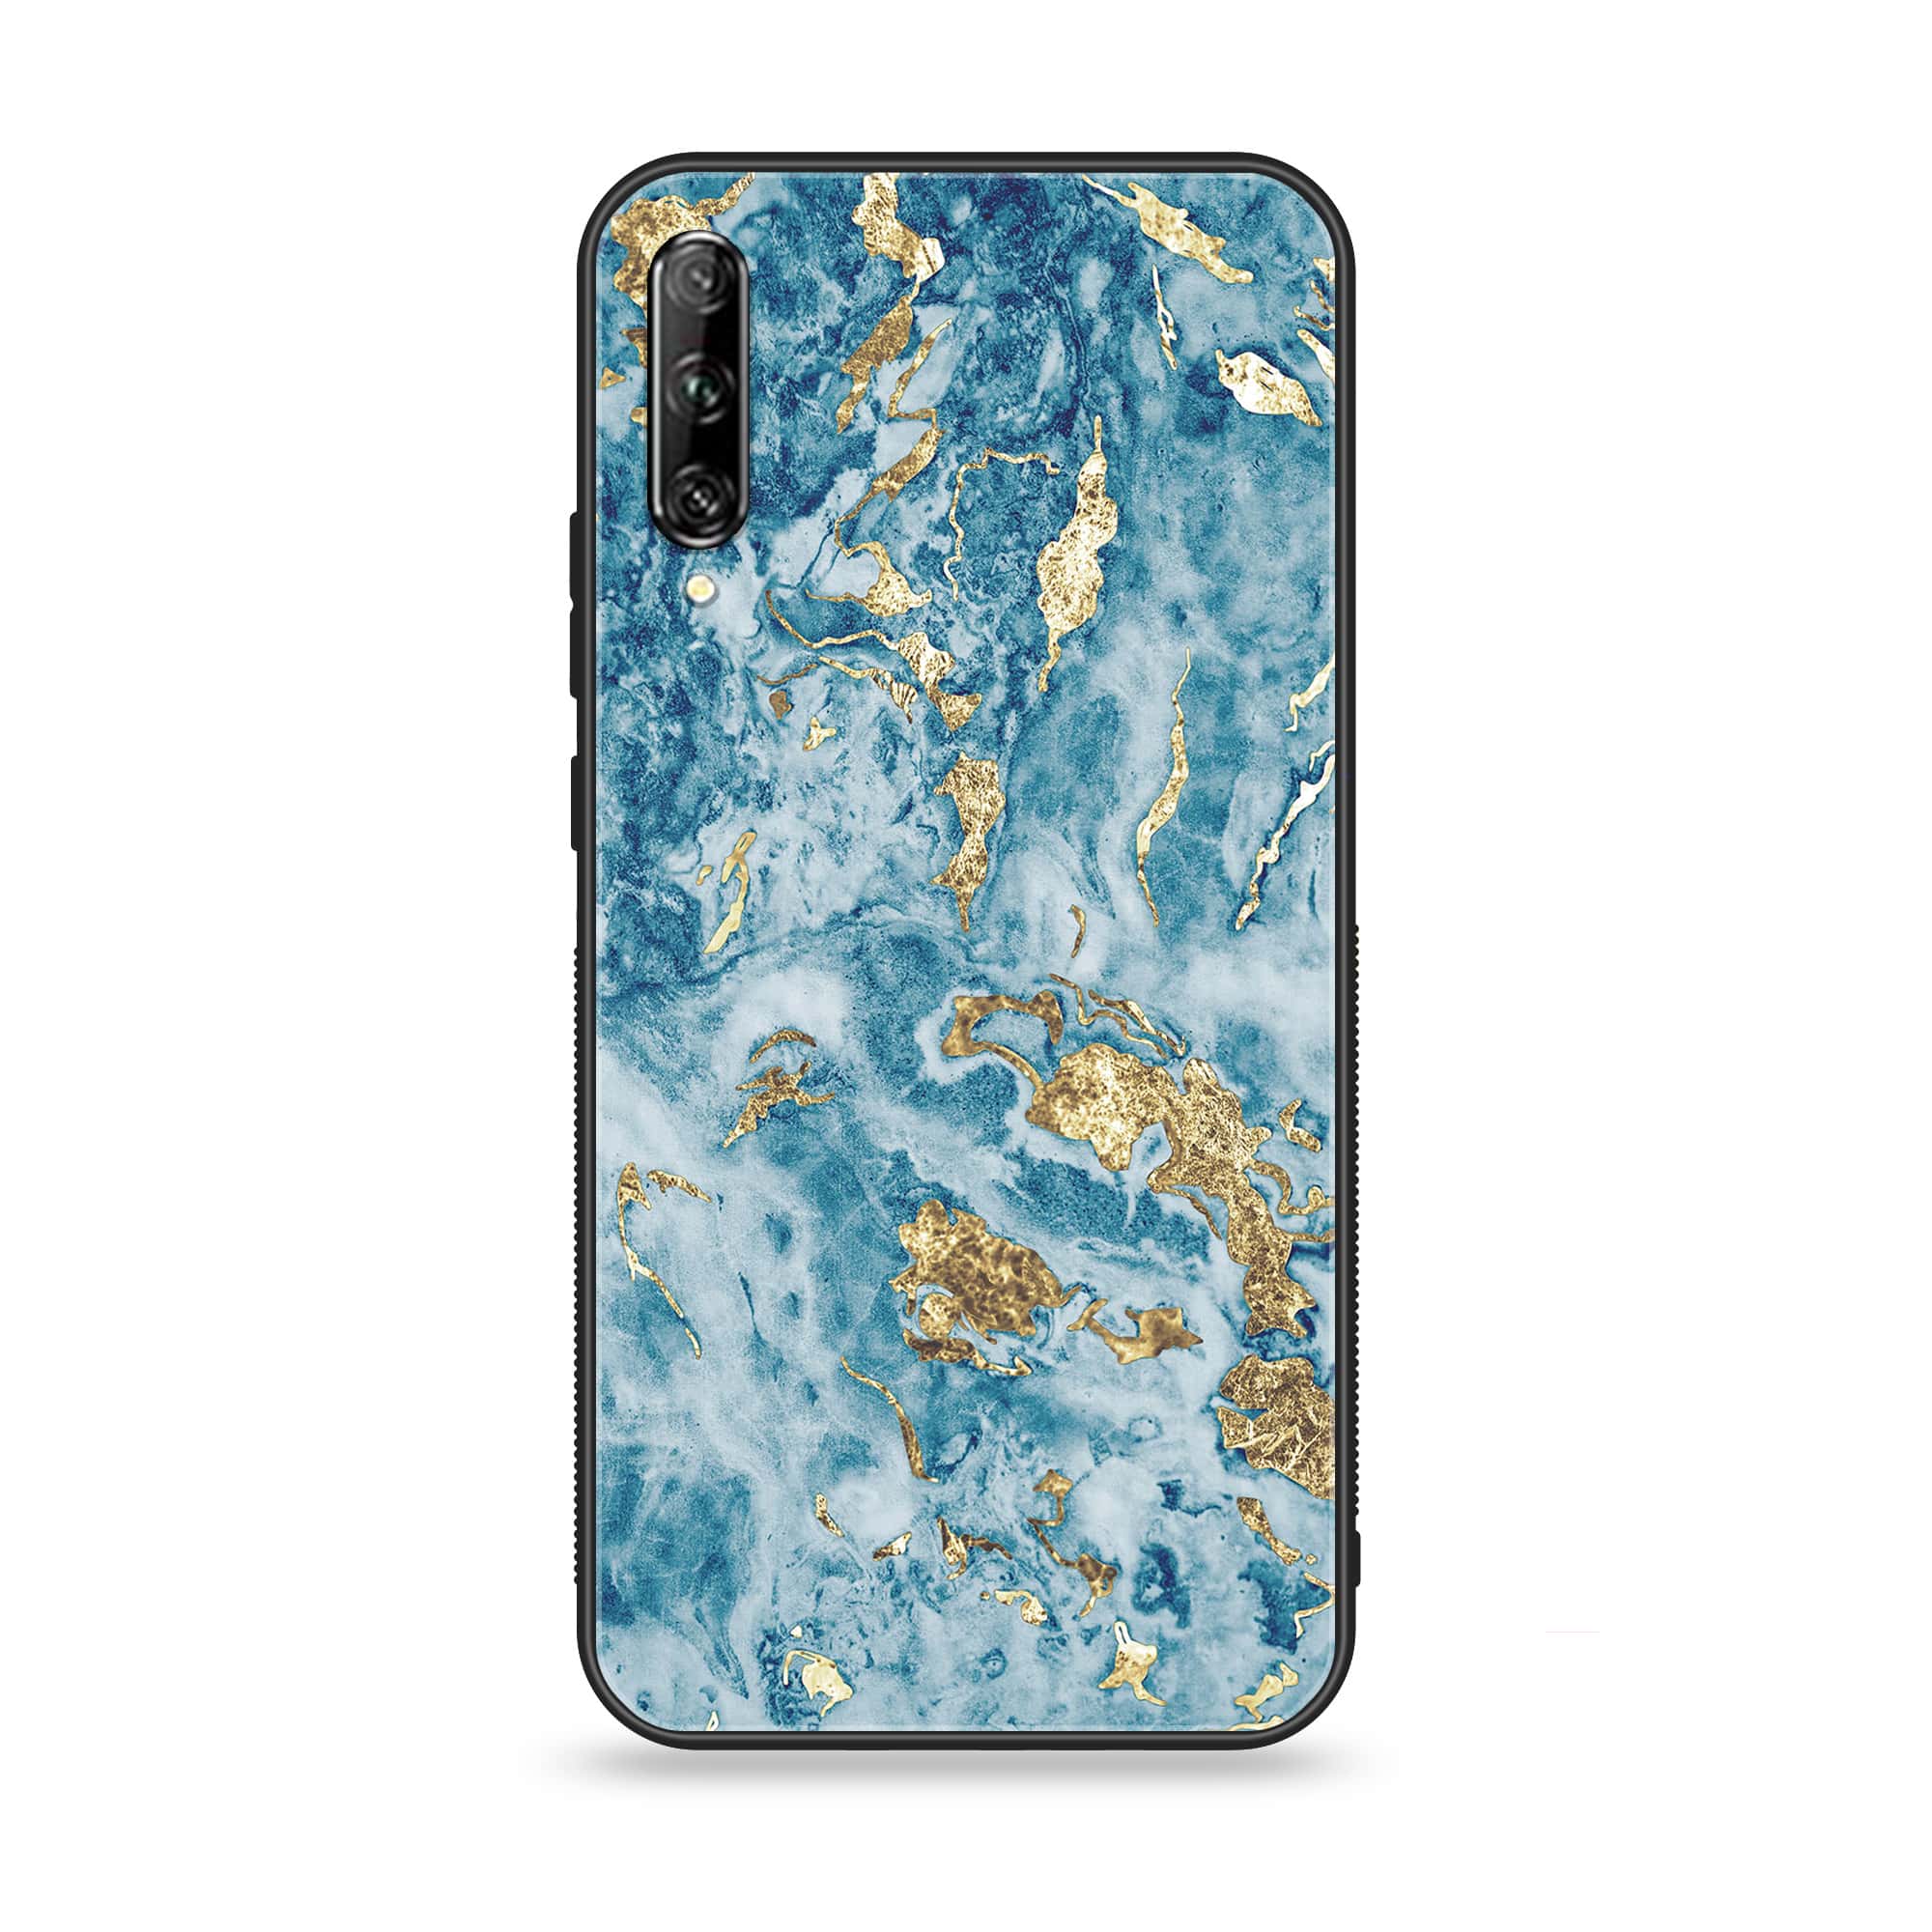 Huawei Y9s - Blue Marble V 2.0 Series - Premium Printed Glass soft Bumper shock Proof Case